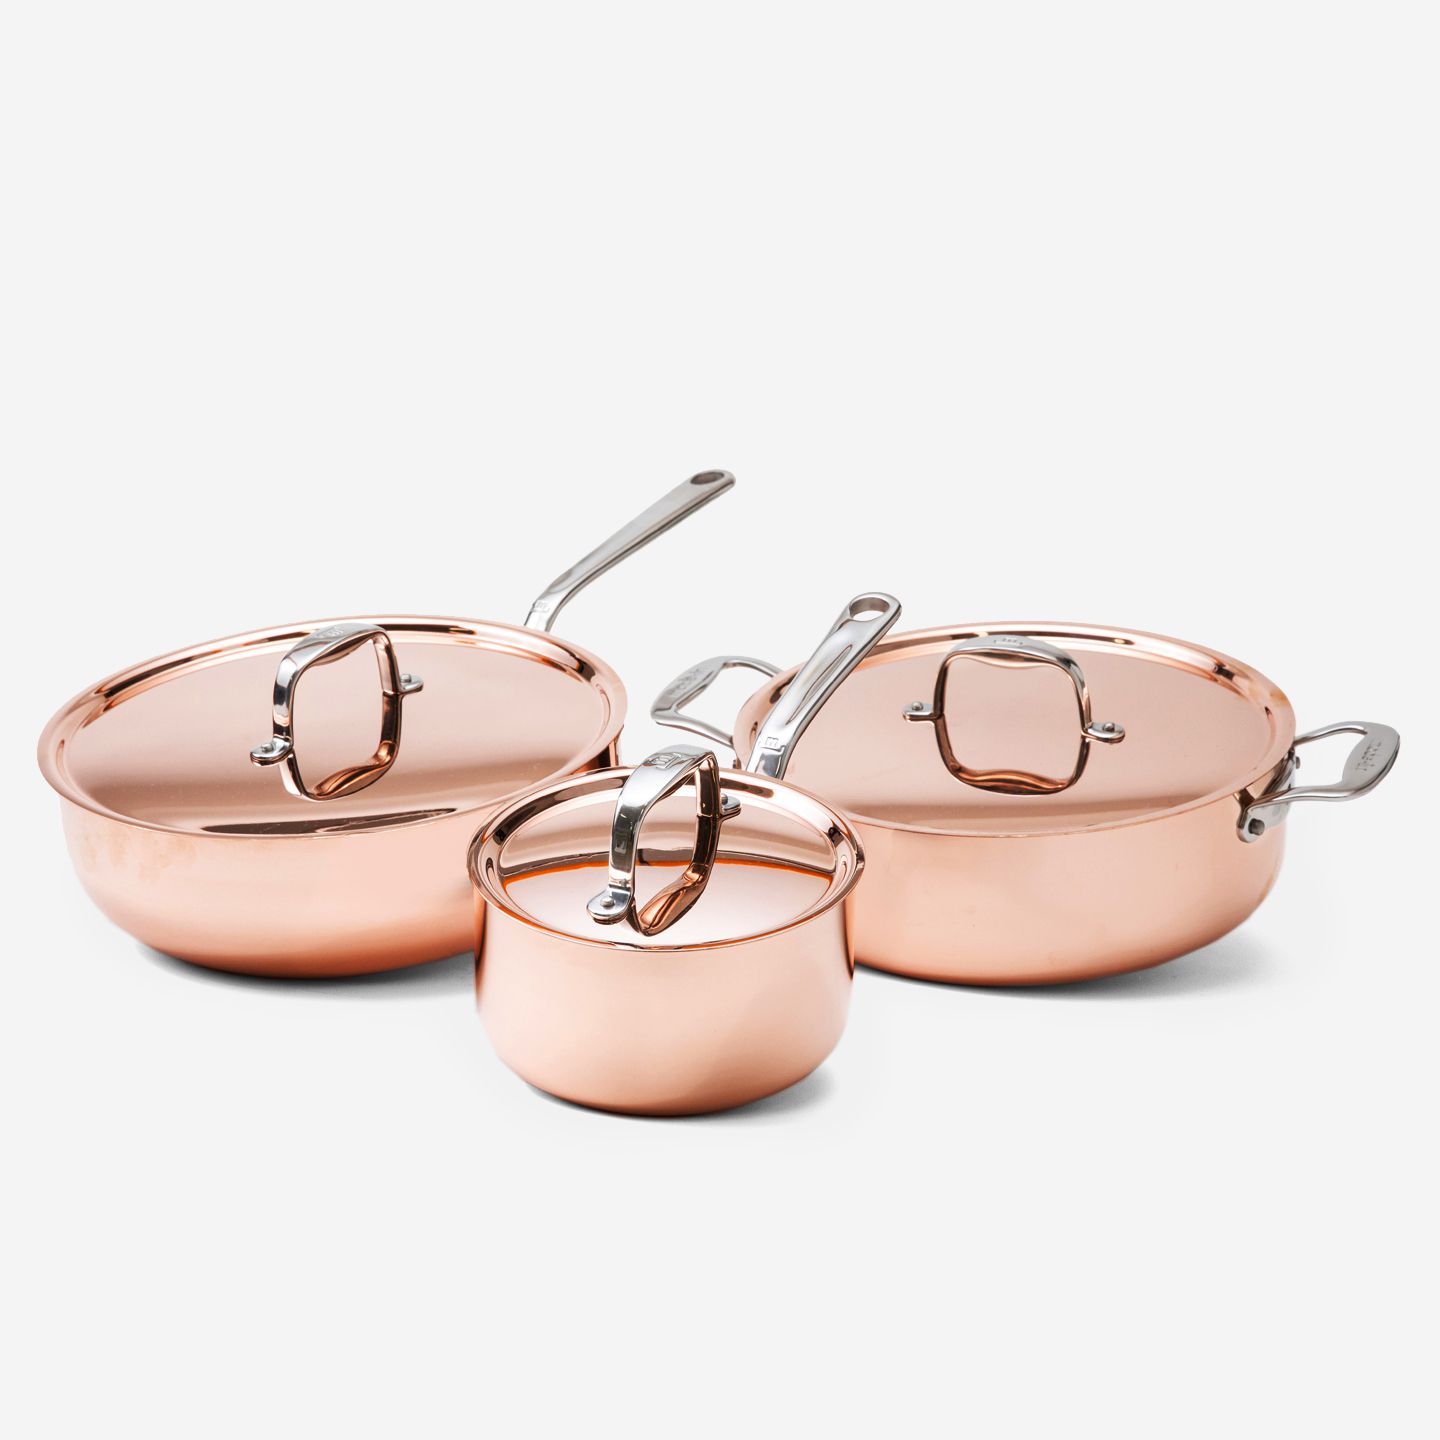 Three copper cookware pots with stainless steel handles